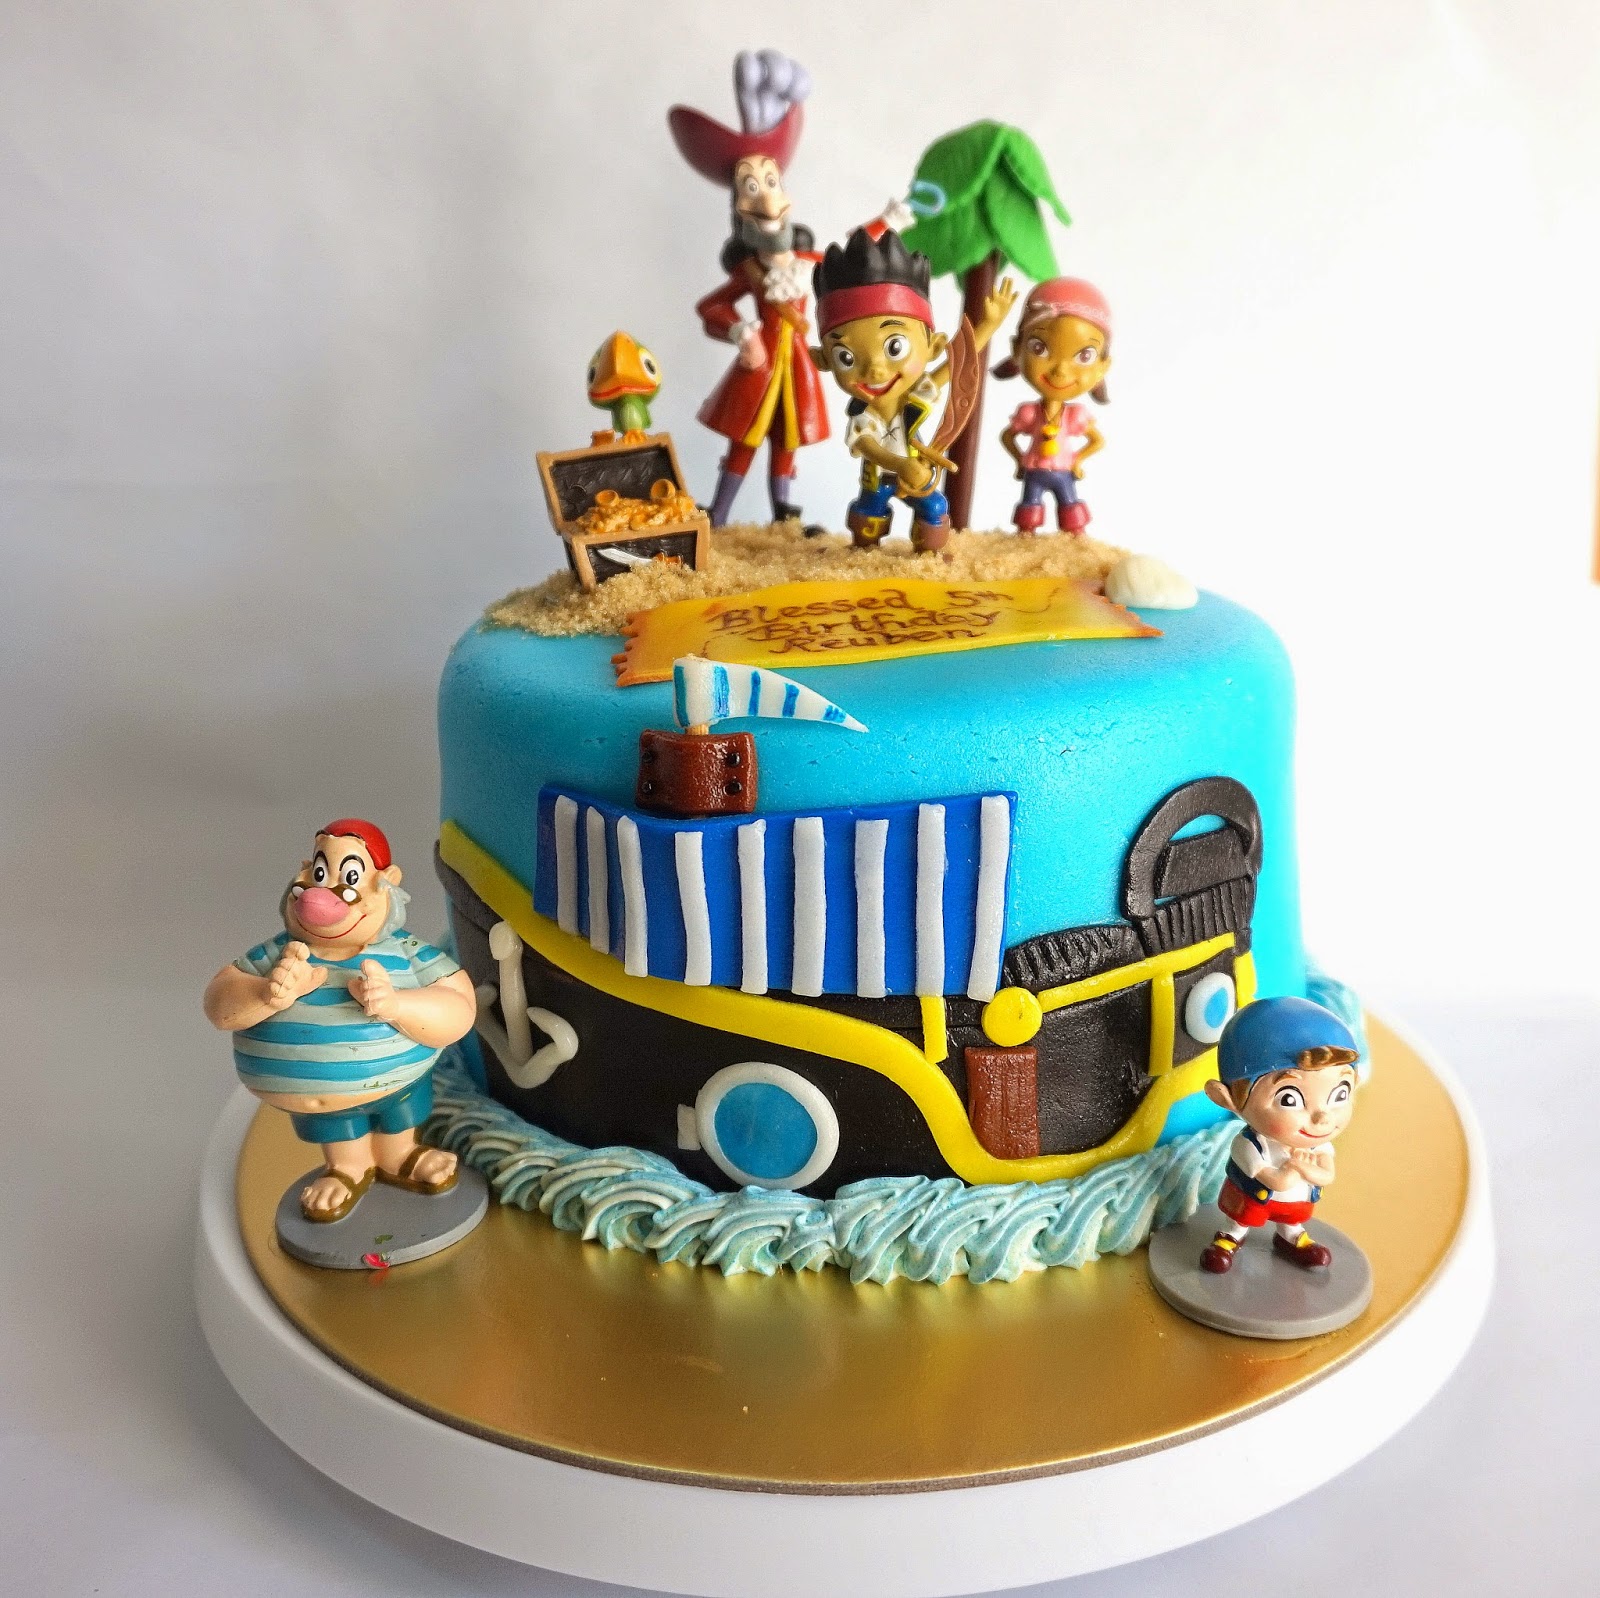 Jack and the neverland pirates themed cake